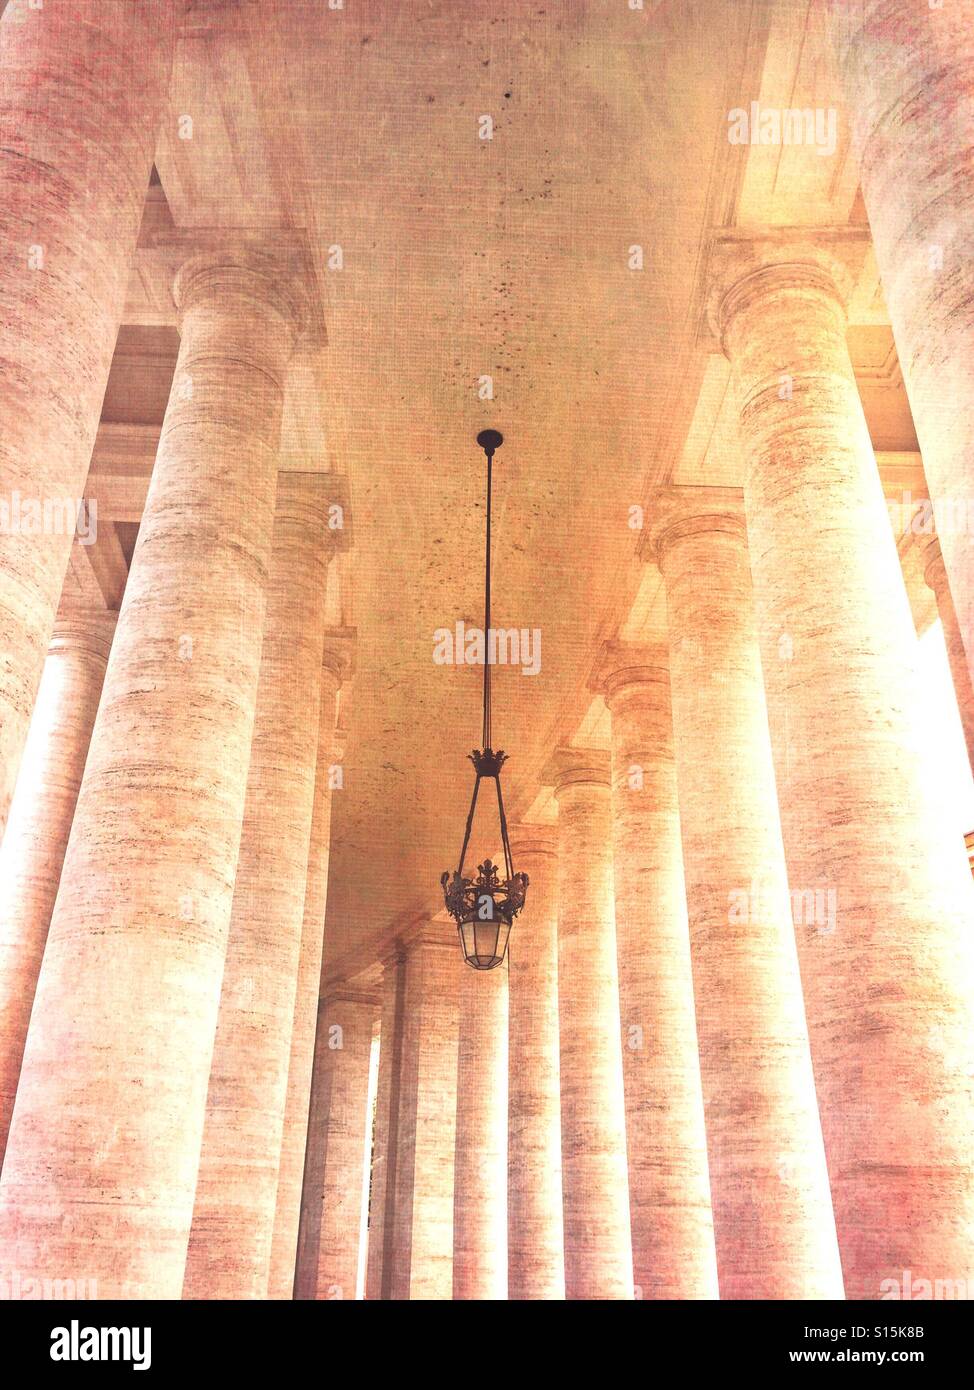 Vatican City - View of colonnade at St Peter's Square. Vintage paper texture overlay. Stock Photo